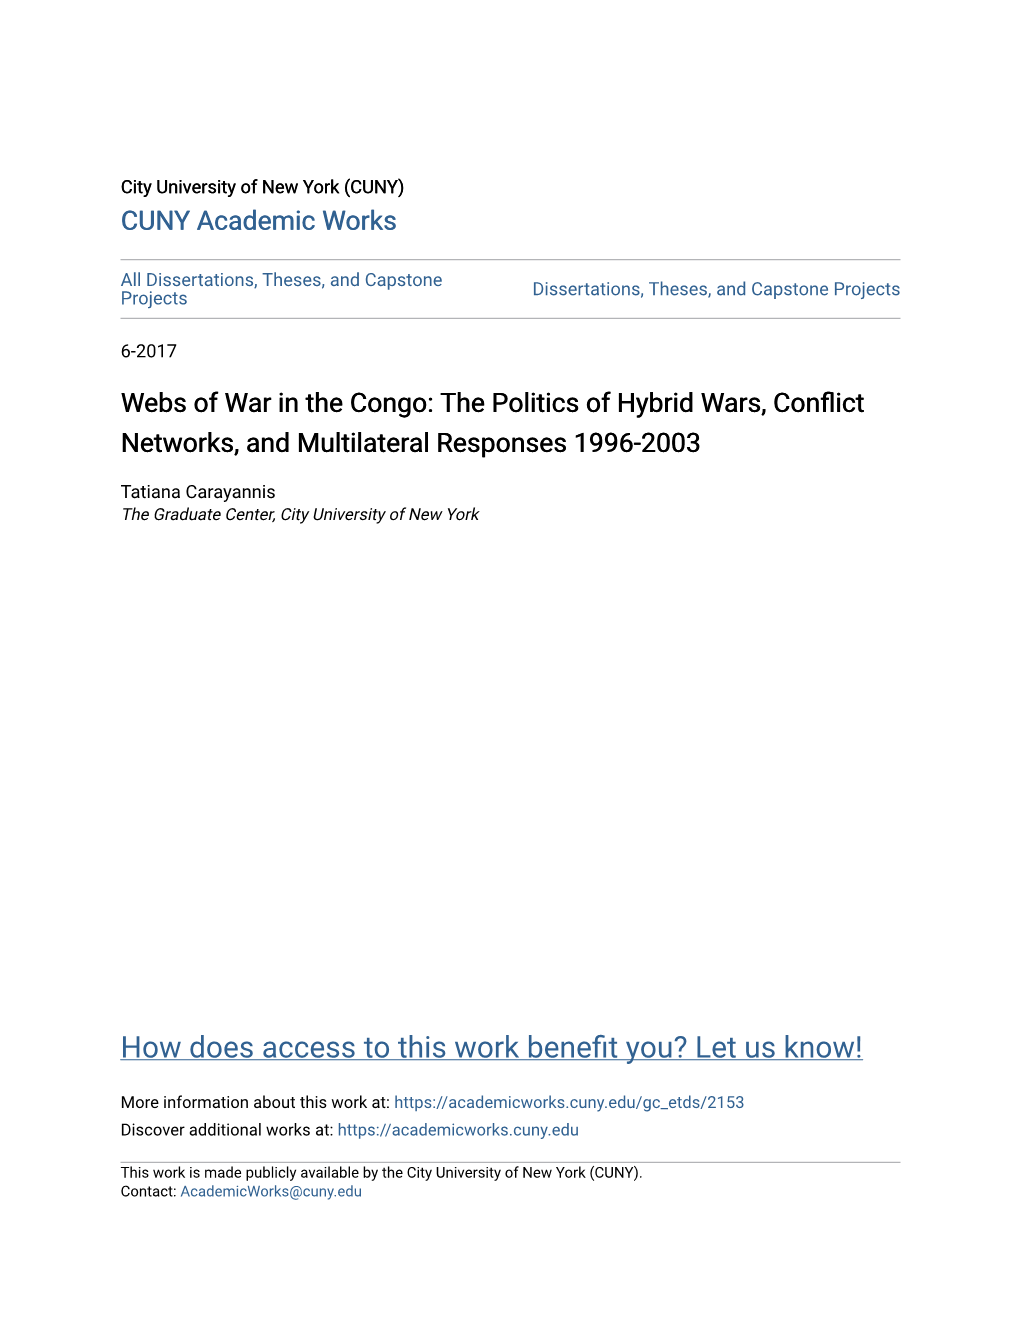 Webs of War in the Congo: the Politics of Hybrid Wars, Conflict Networks, and Multilateral Responses 1996-2003